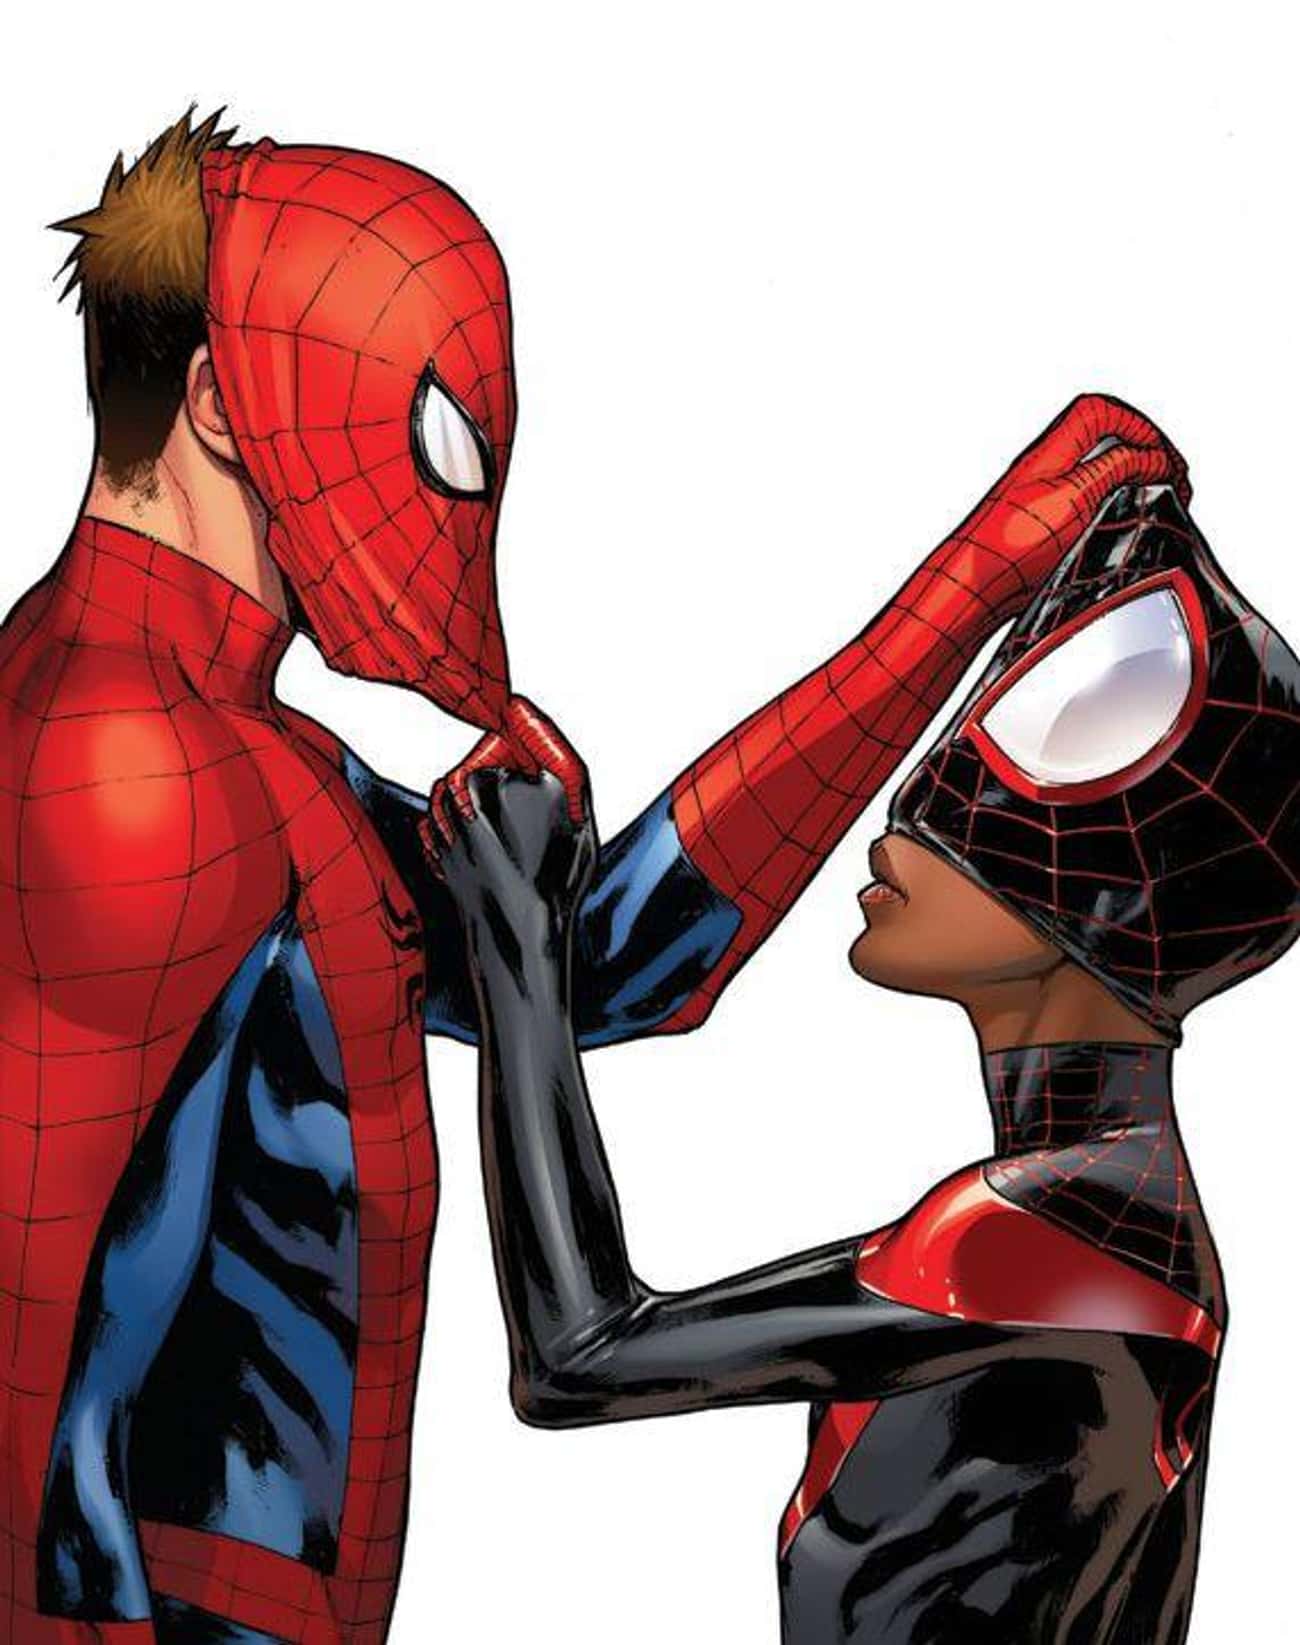 Miles Morales Of Earth-1610 Met The Peter Parker Of Earth-616 In The 'Spider-Men' Crossover